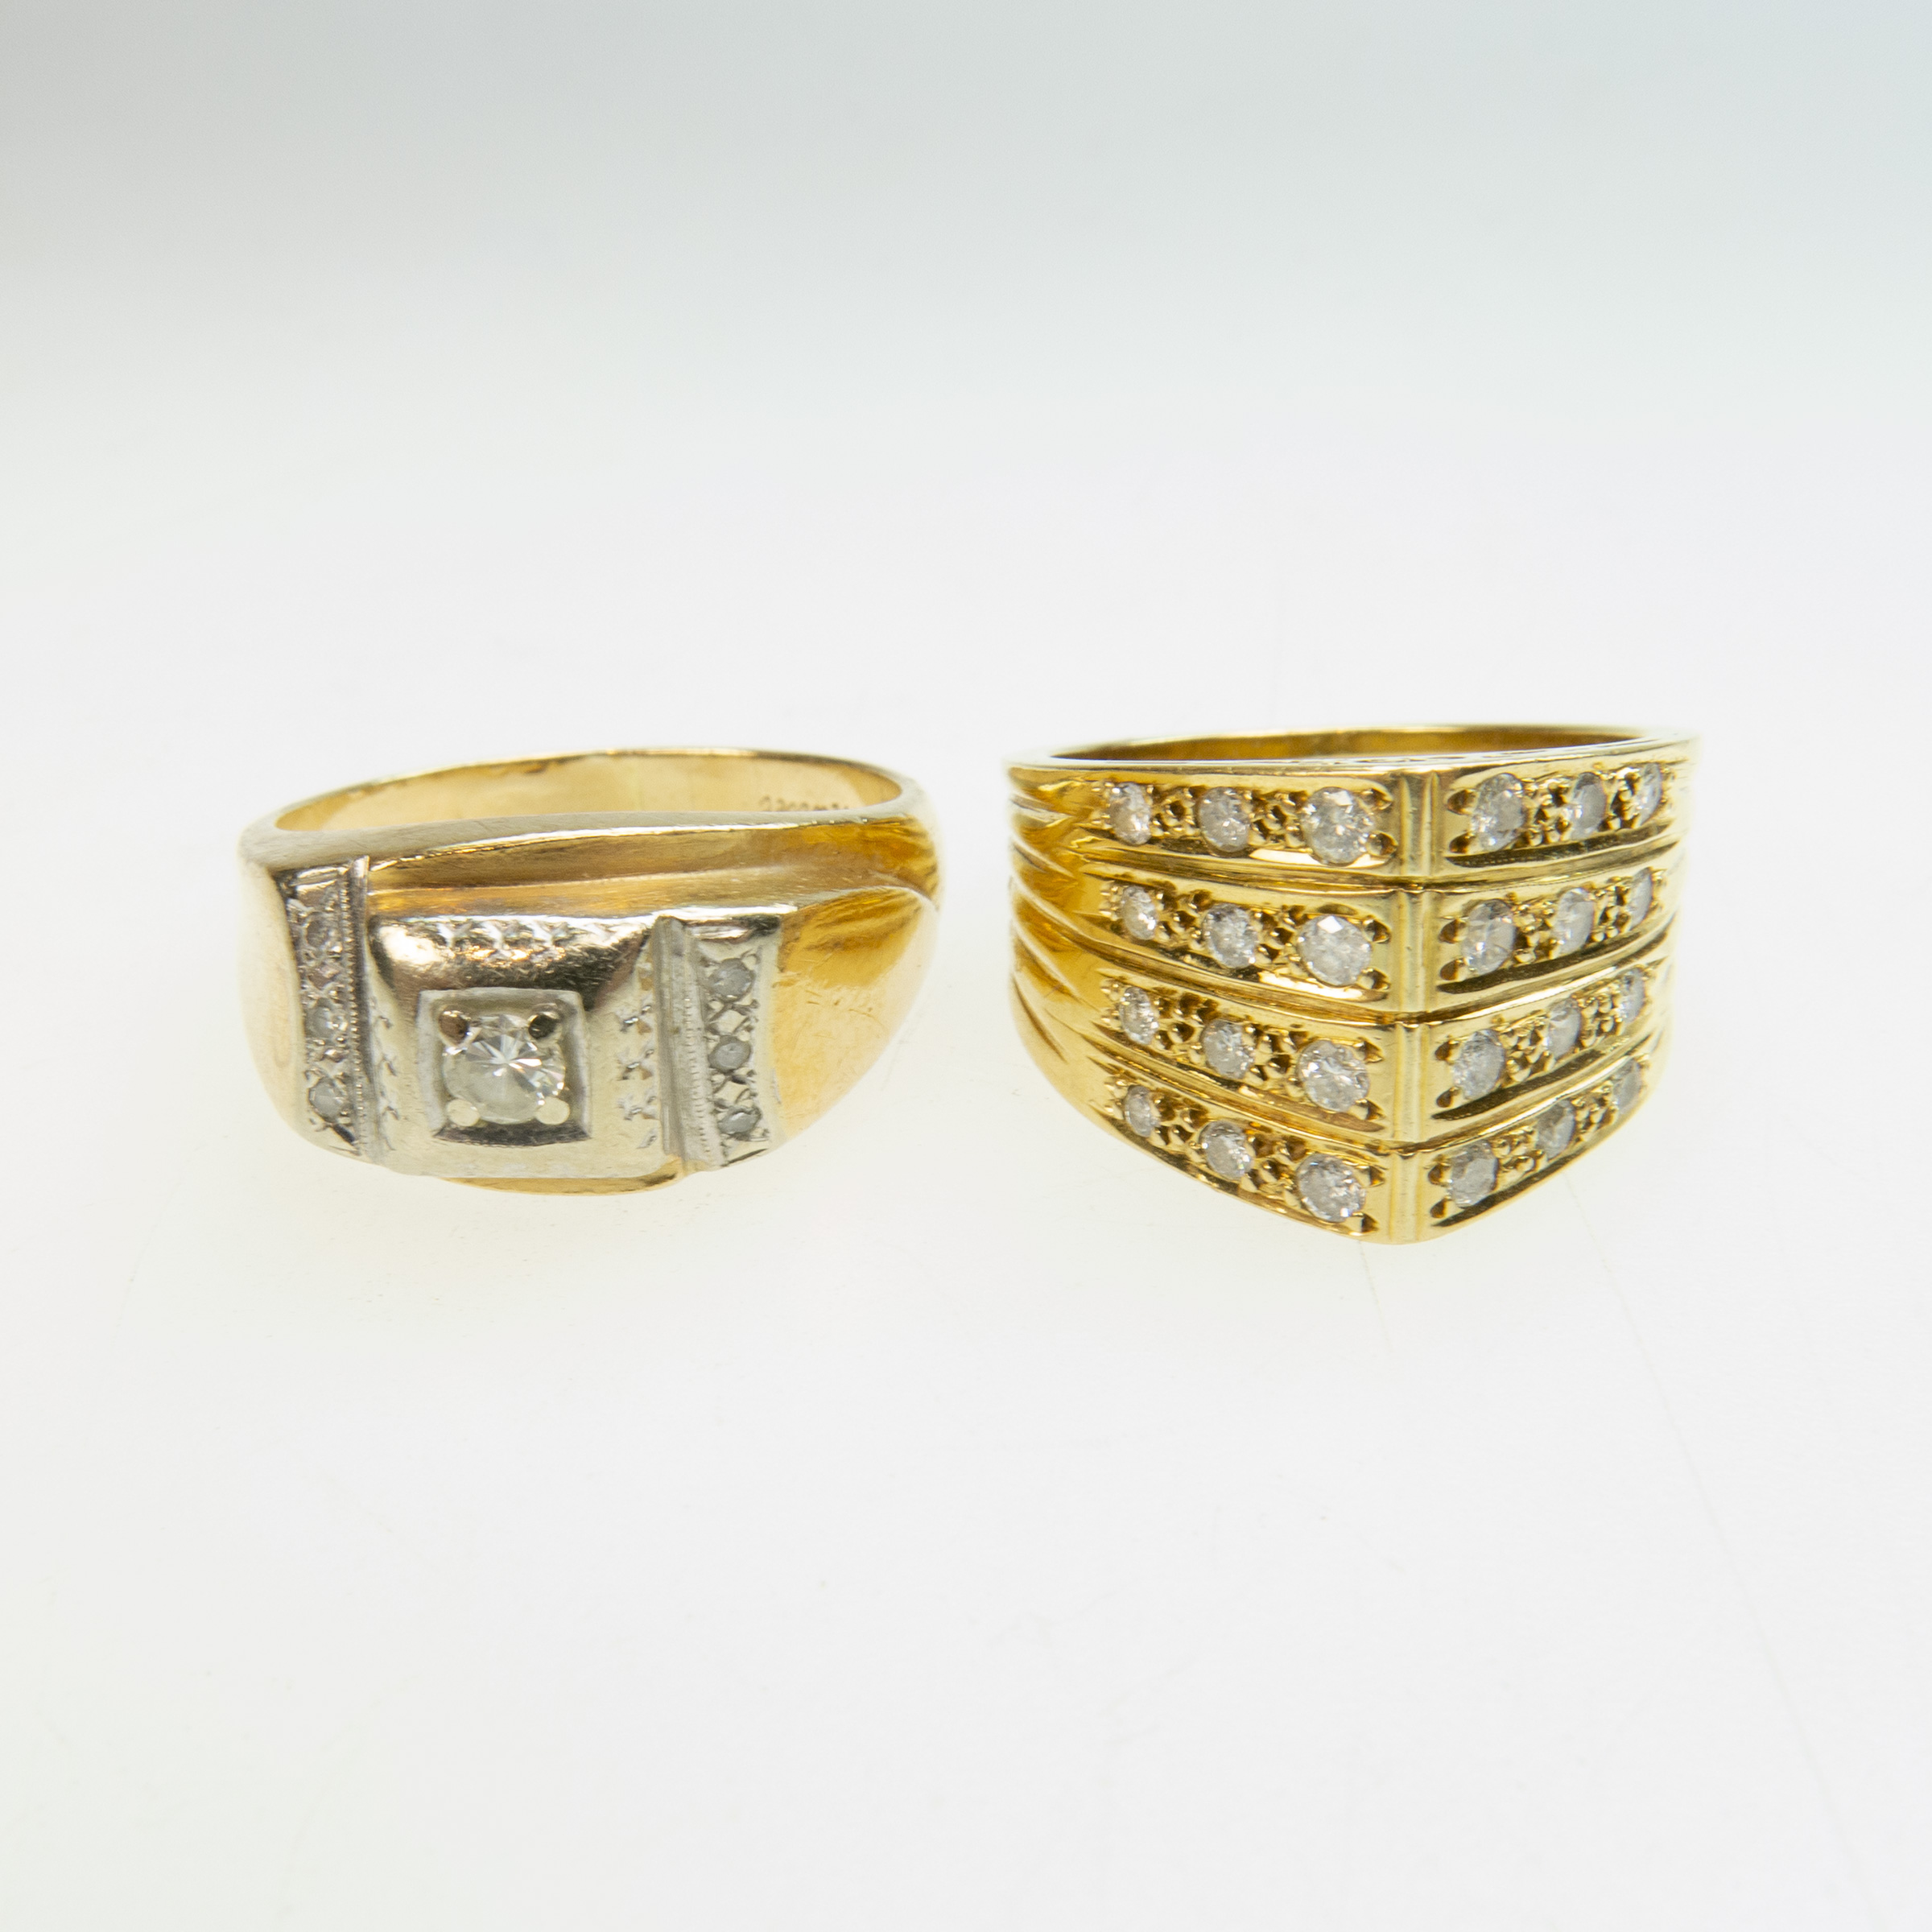 1 x 18k and 1 x 14k Yellow Gold Rings